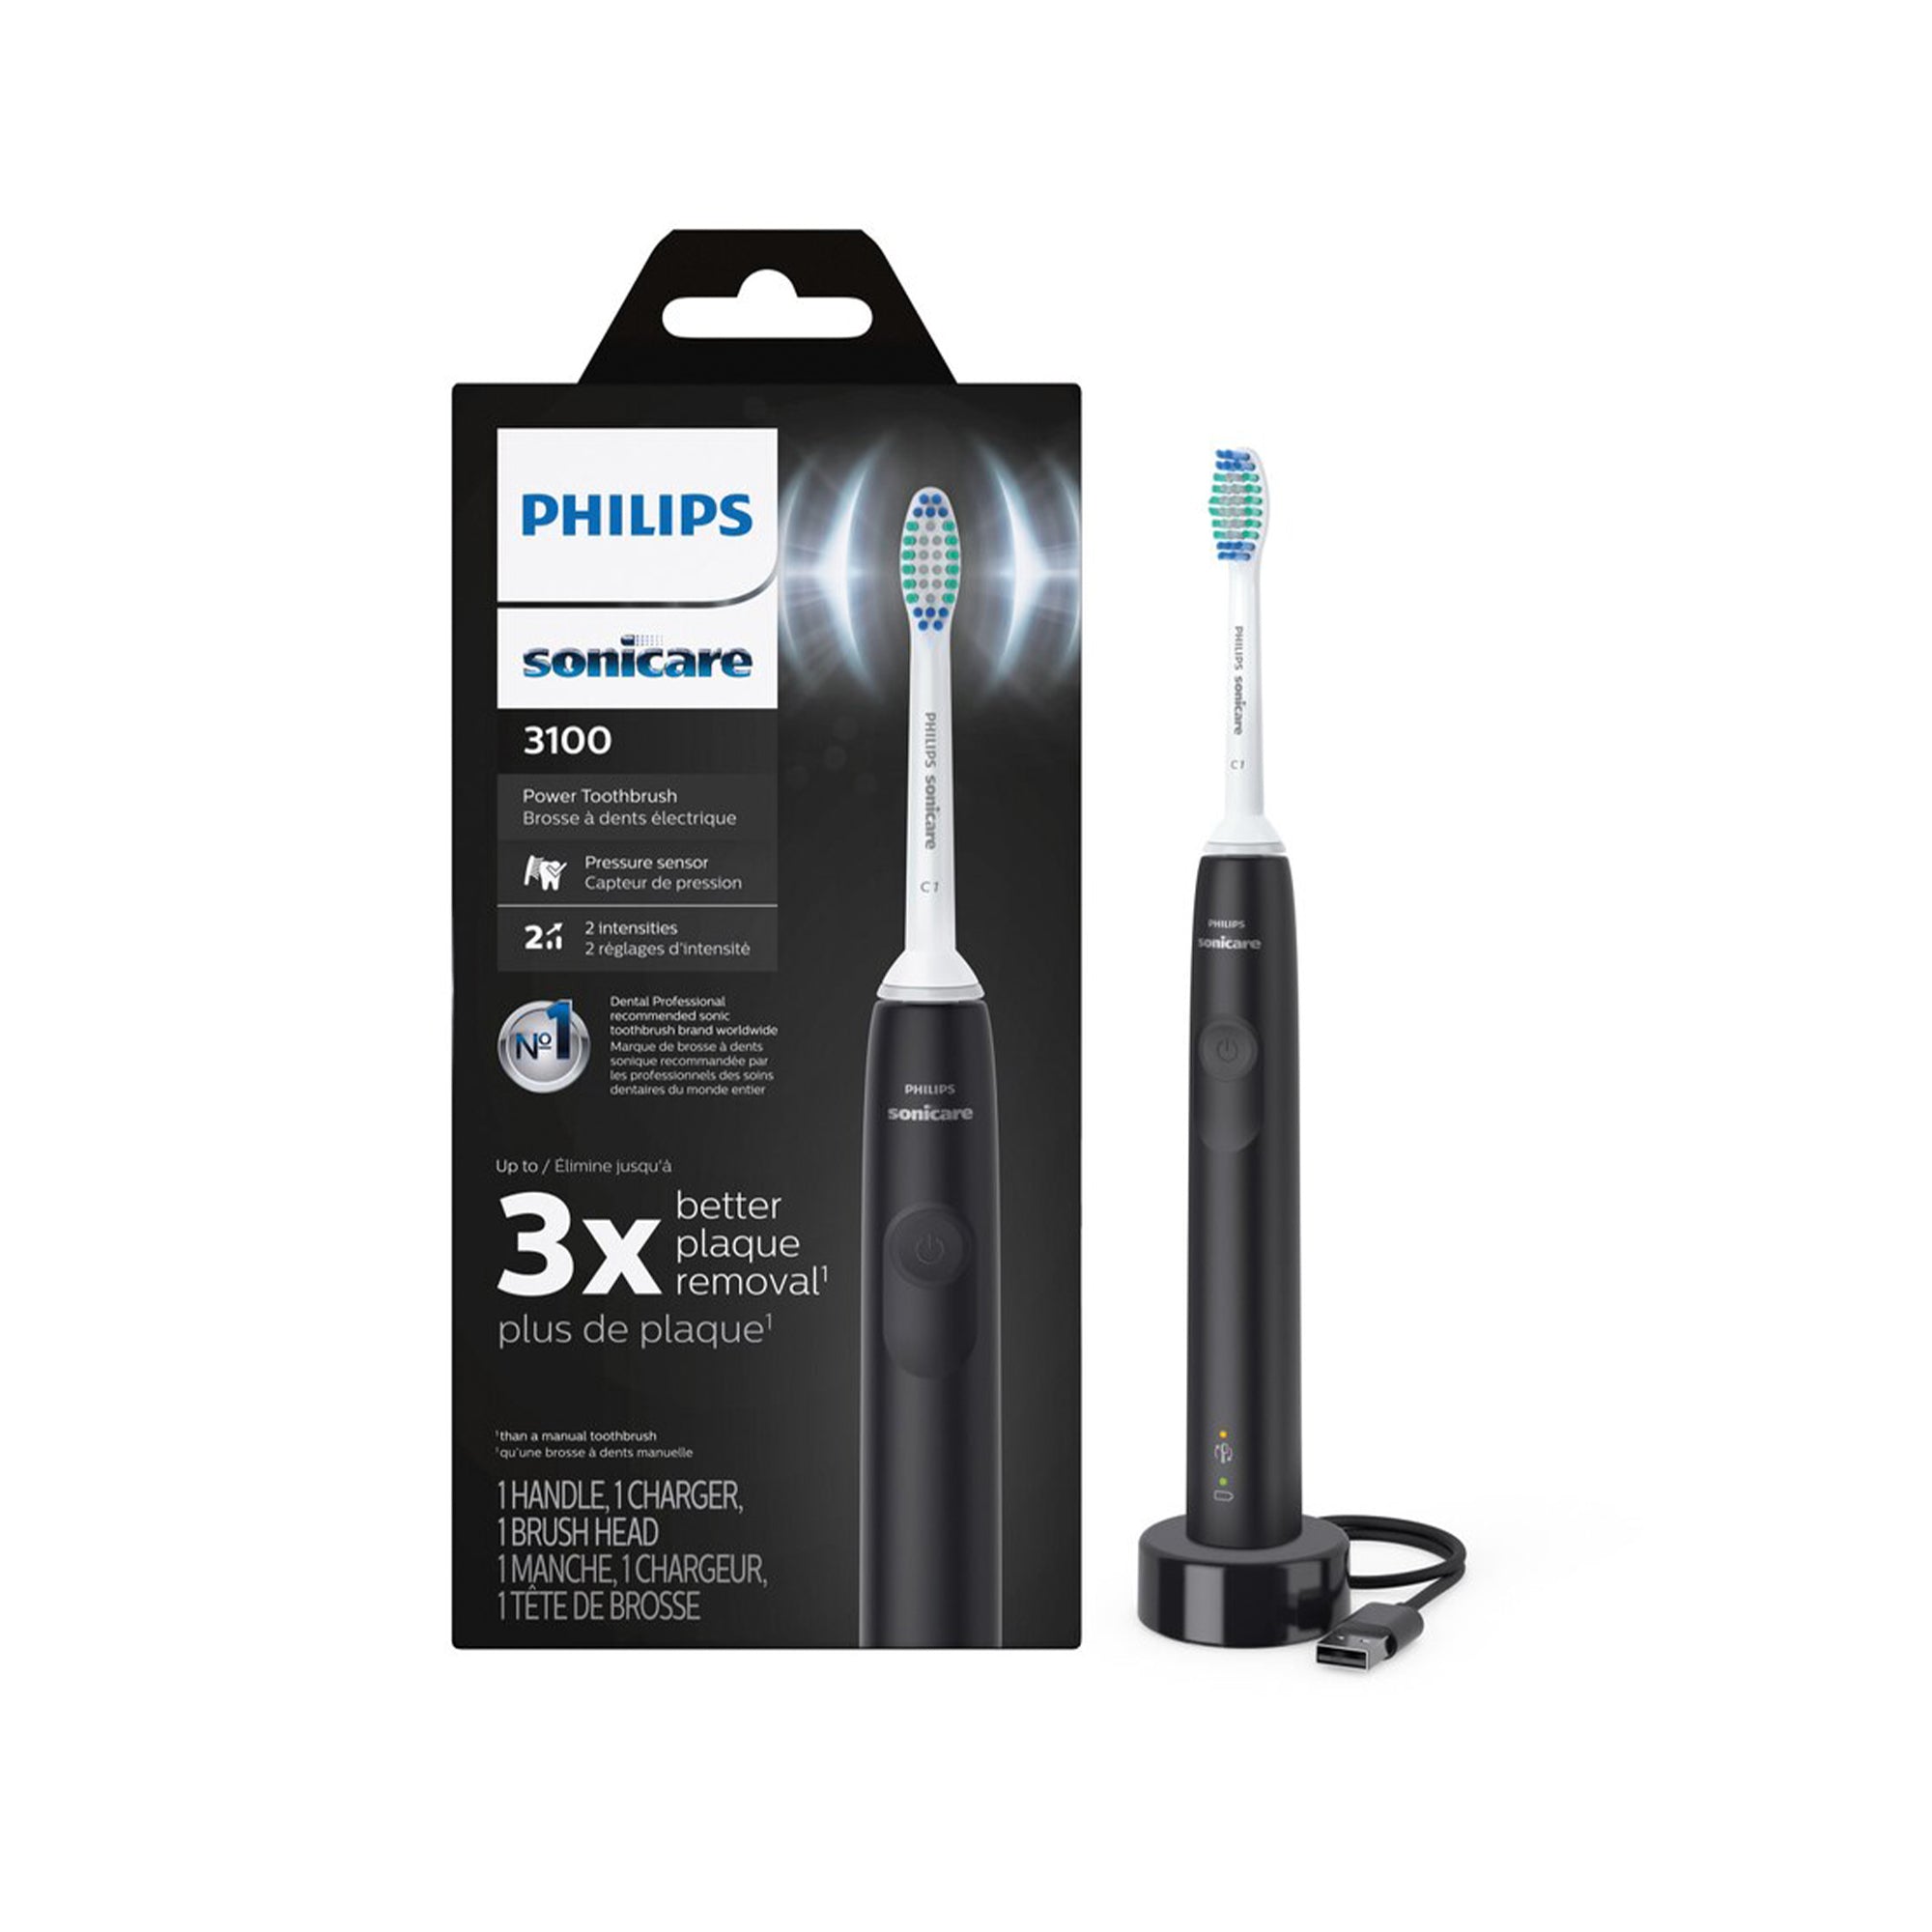 Philips Sonicare 3100 Rechargeable Electric Power Toothbrush with Pressure Sensor Model HX3681/04